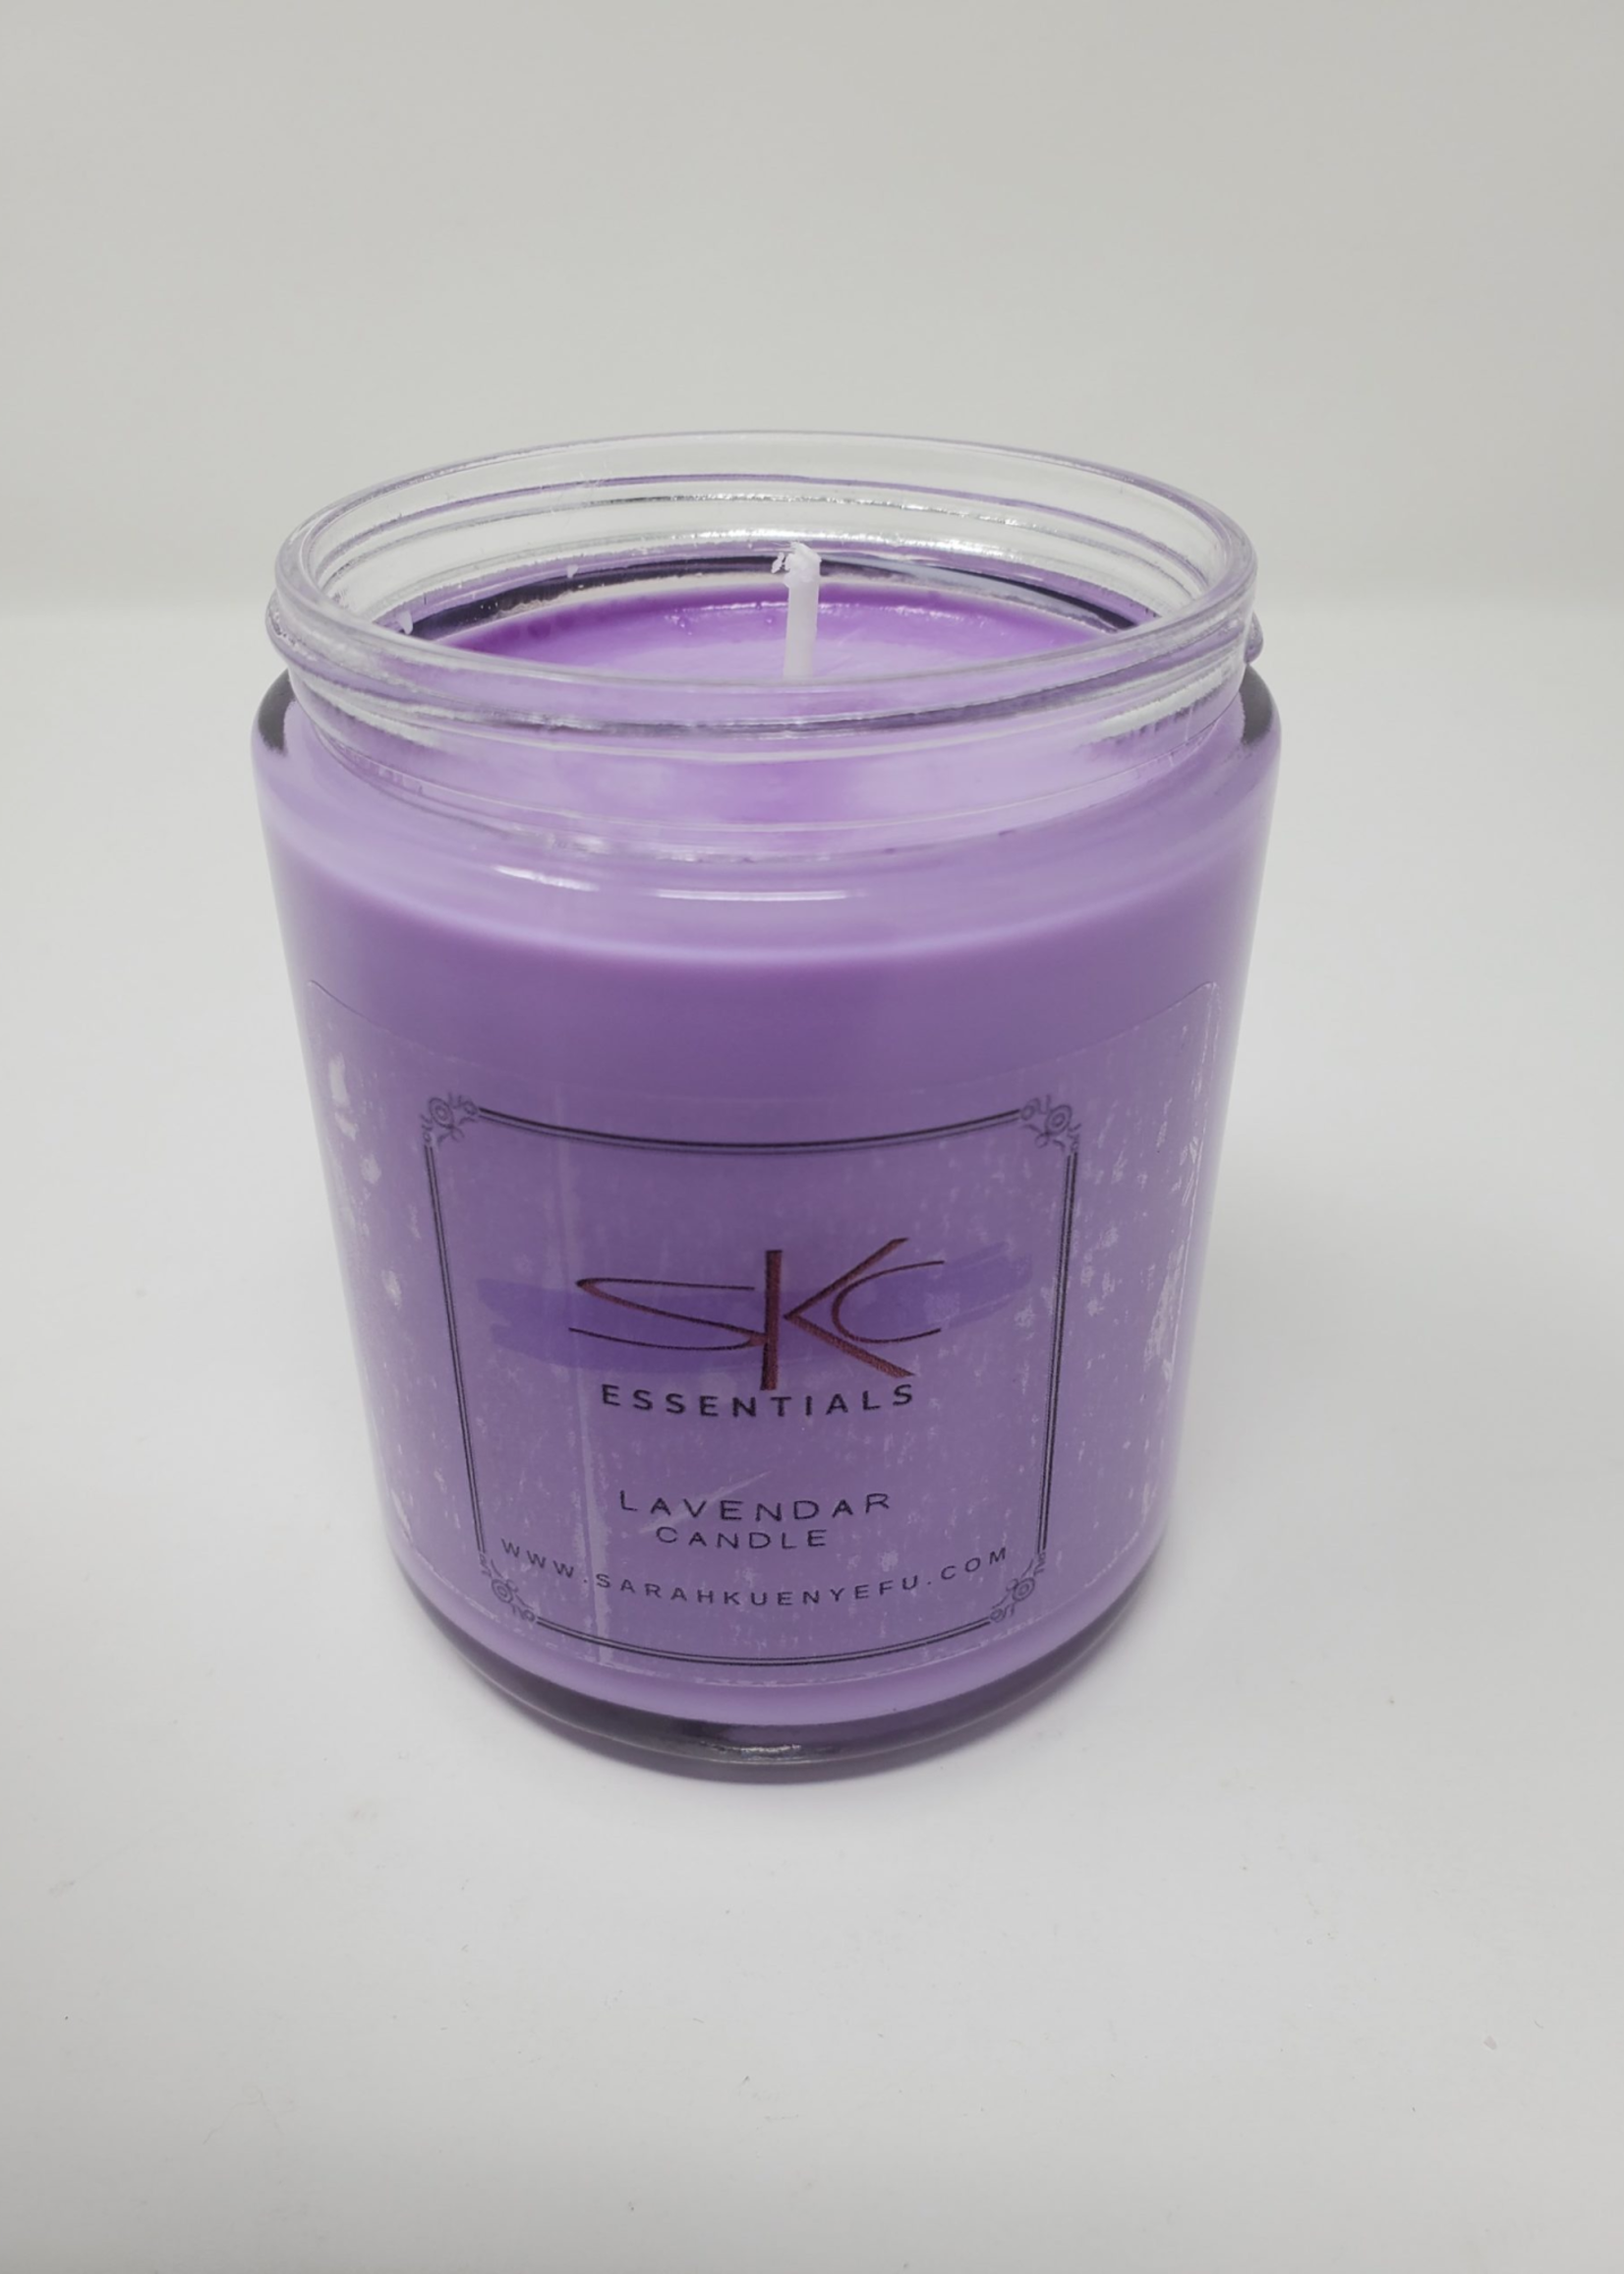 SKC SCENTED CANDLE